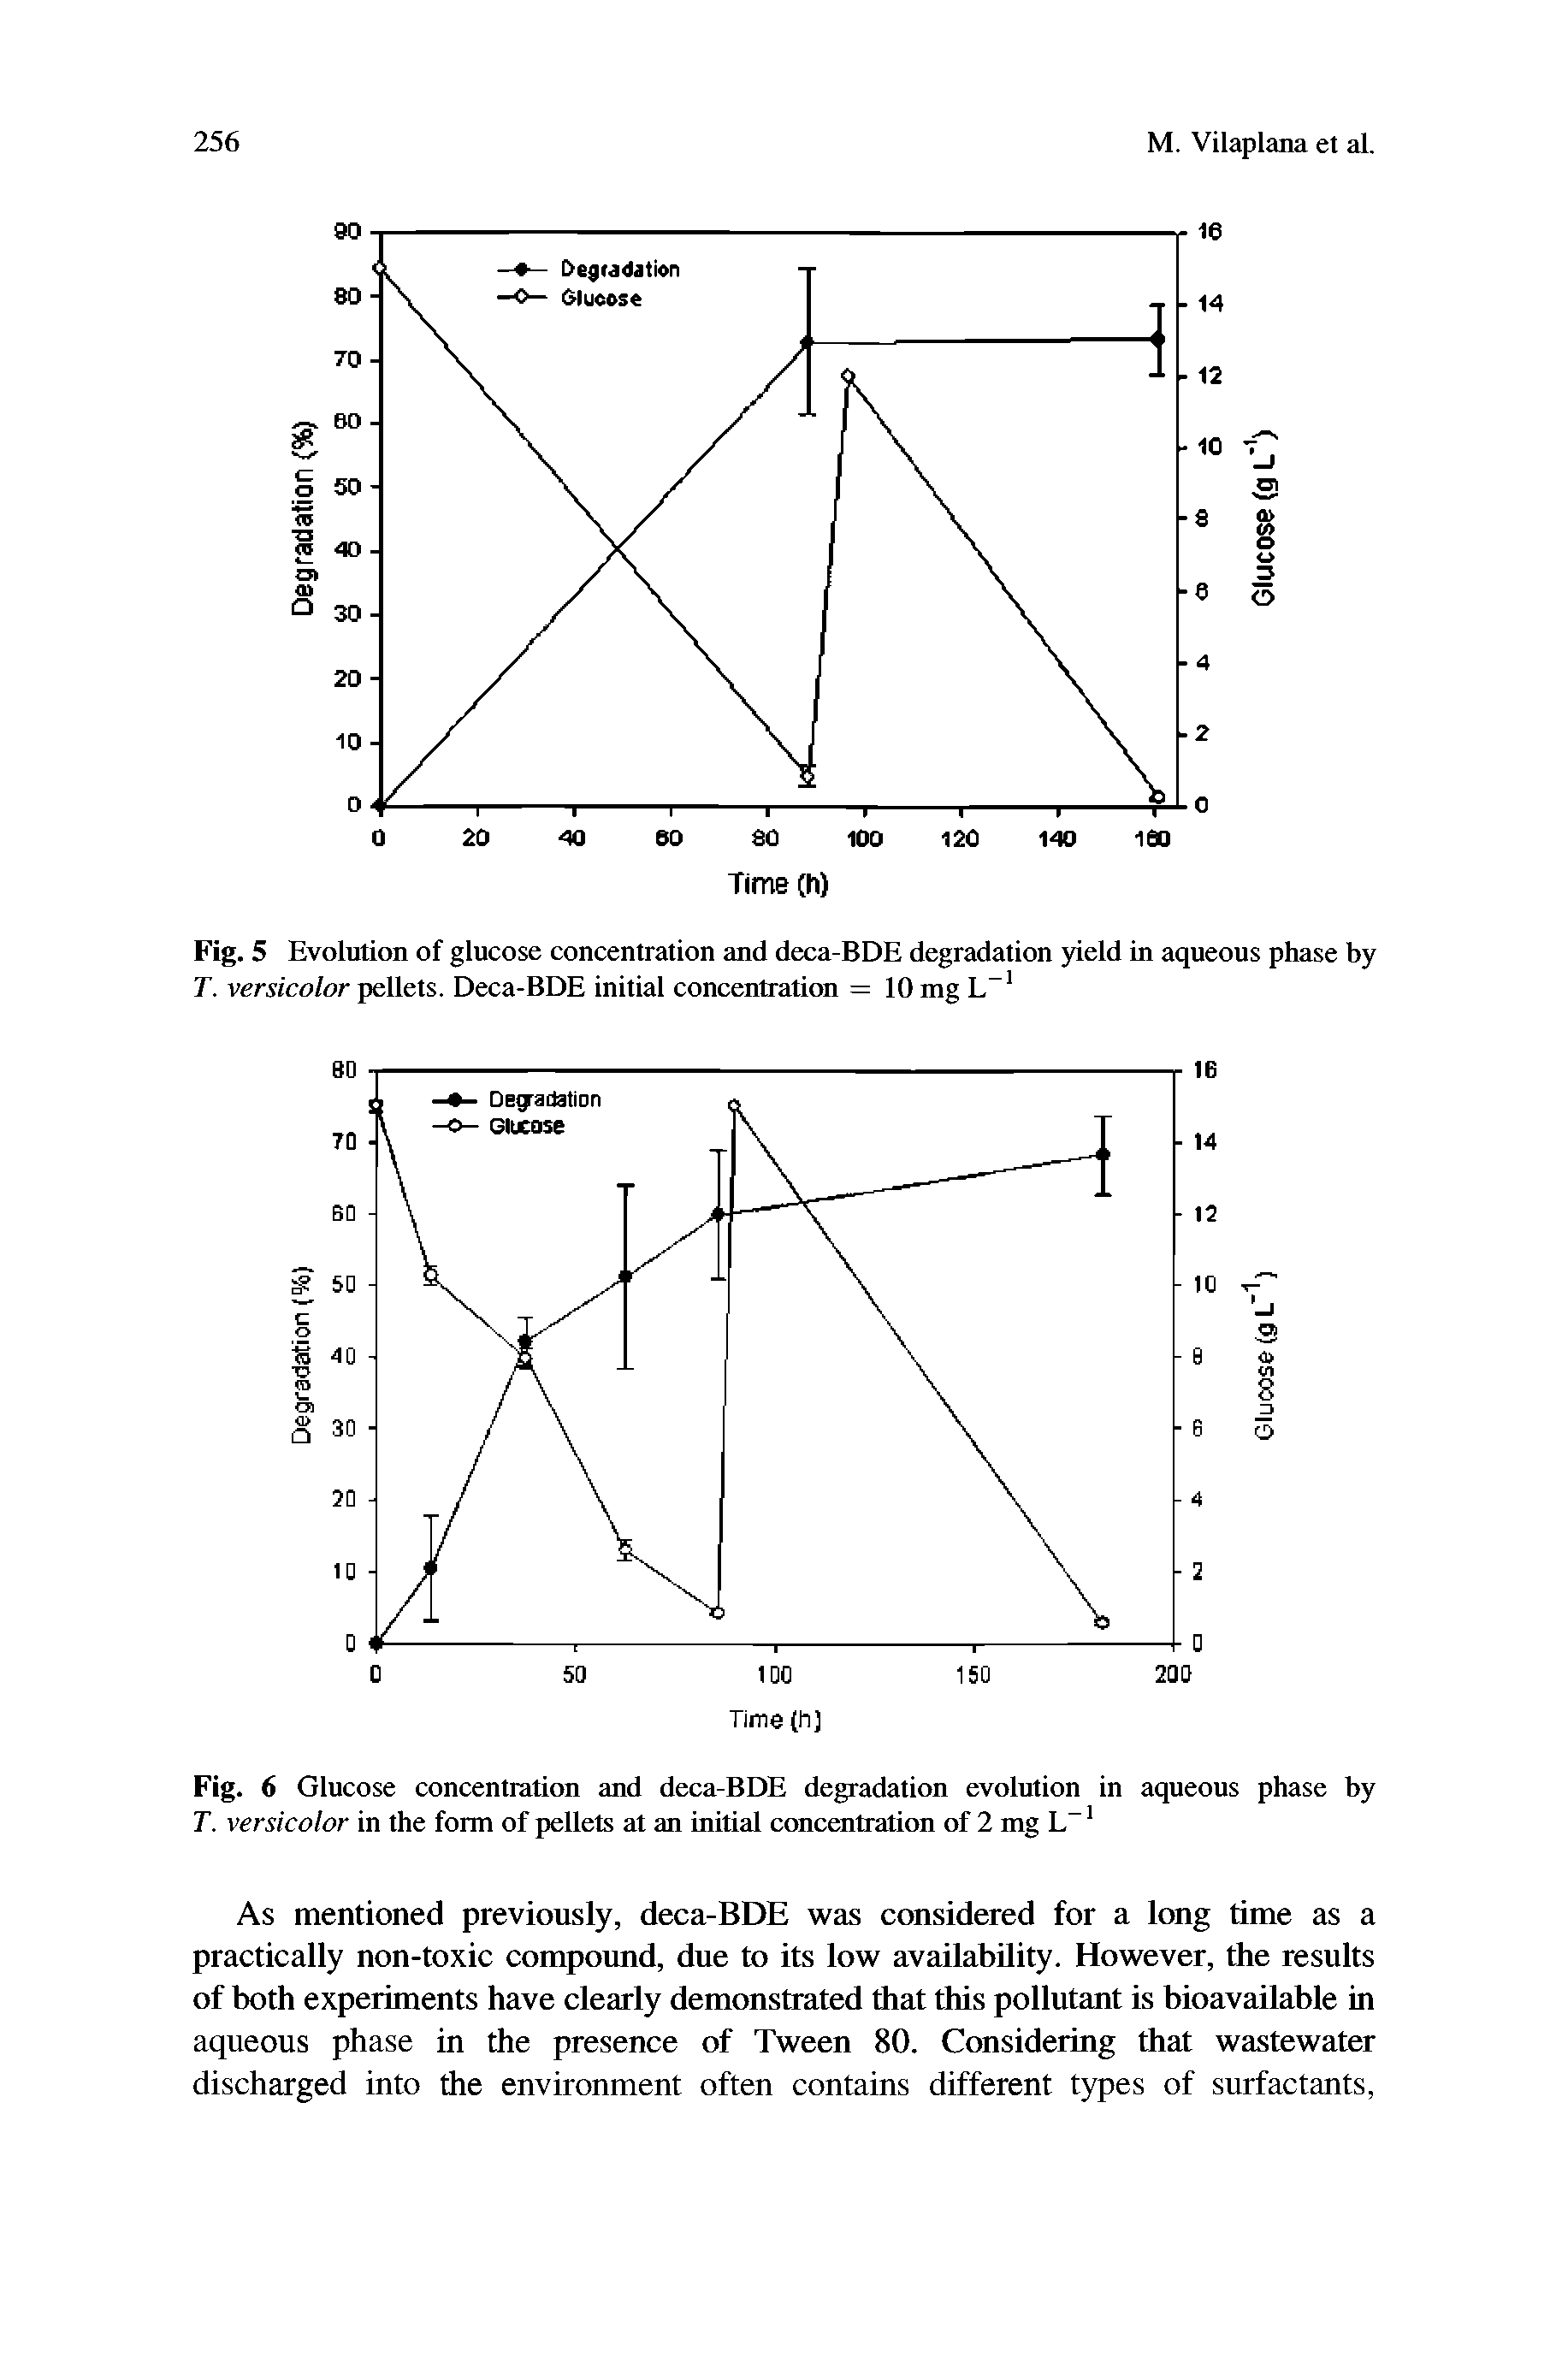 Fig. 5 Evolution of glucose concentration and deca-BDE degradation yield in aqueous phase by T. versicolor pellets. Deca-BDE initial concentration = 10 mg L-1...